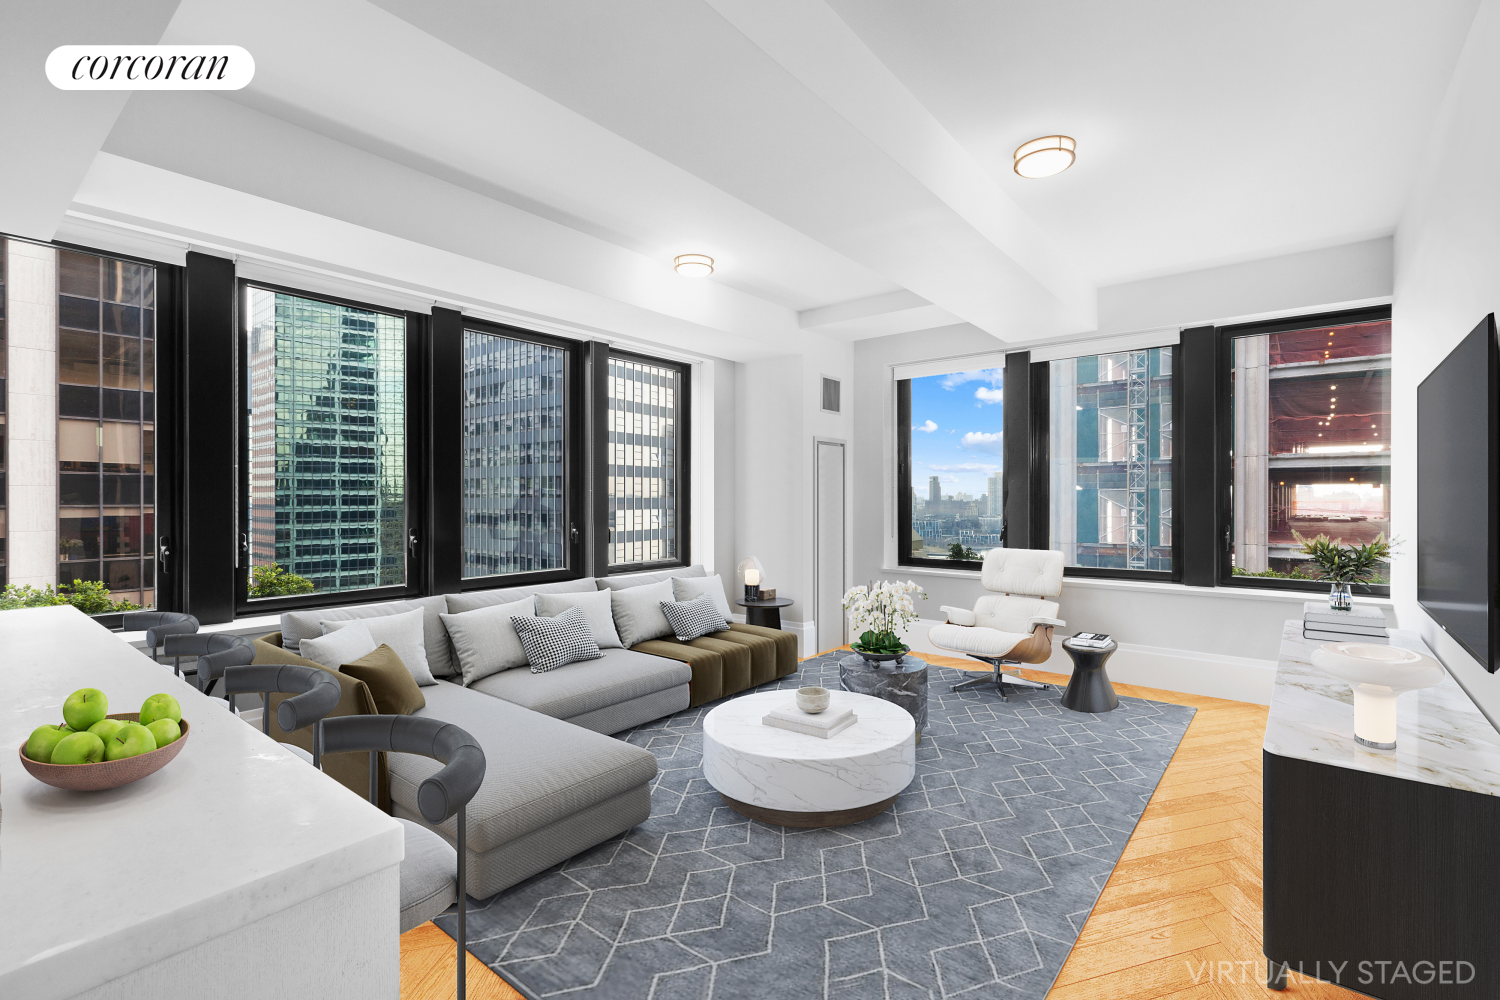 101 Wall Street 23A, Financial District, Downtown, NYC - 3 Bedrooms  
3 Bathrooms  
5 Rooms - 